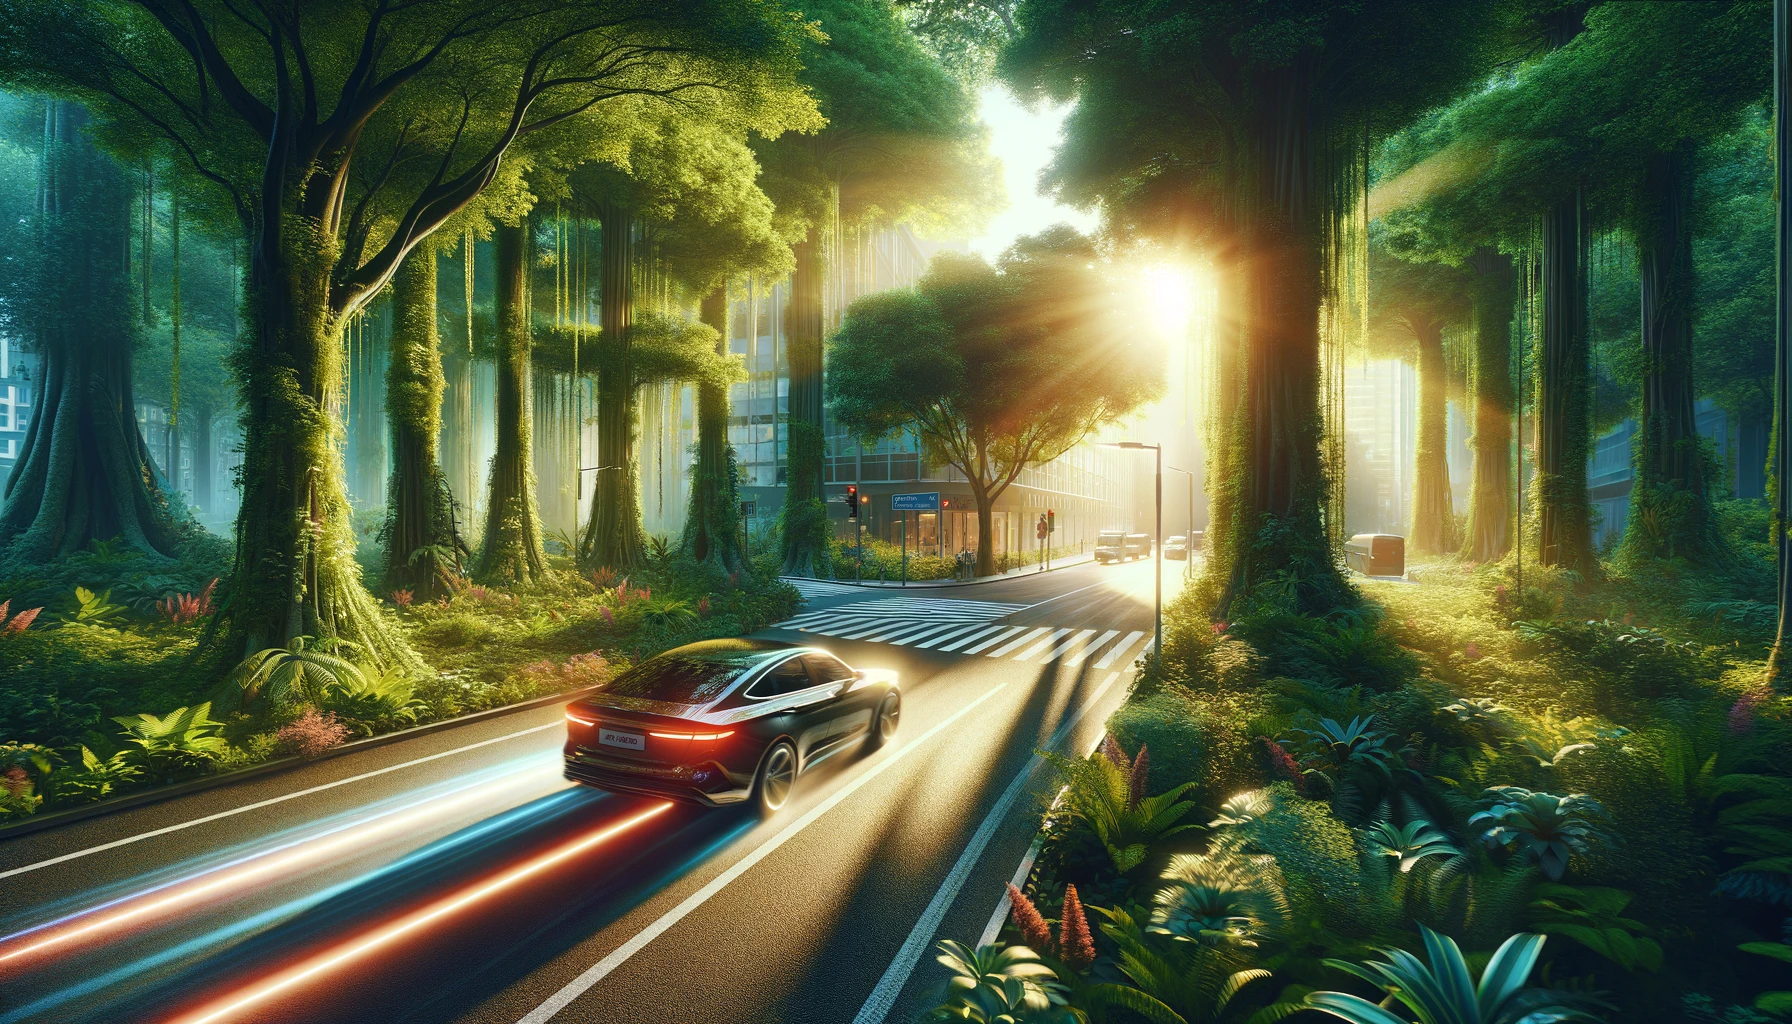 A car speeds down a vibrant and surreal city street bordered by lush, towering trees under a radiant sunrise, creating a blend of nature and urban life.